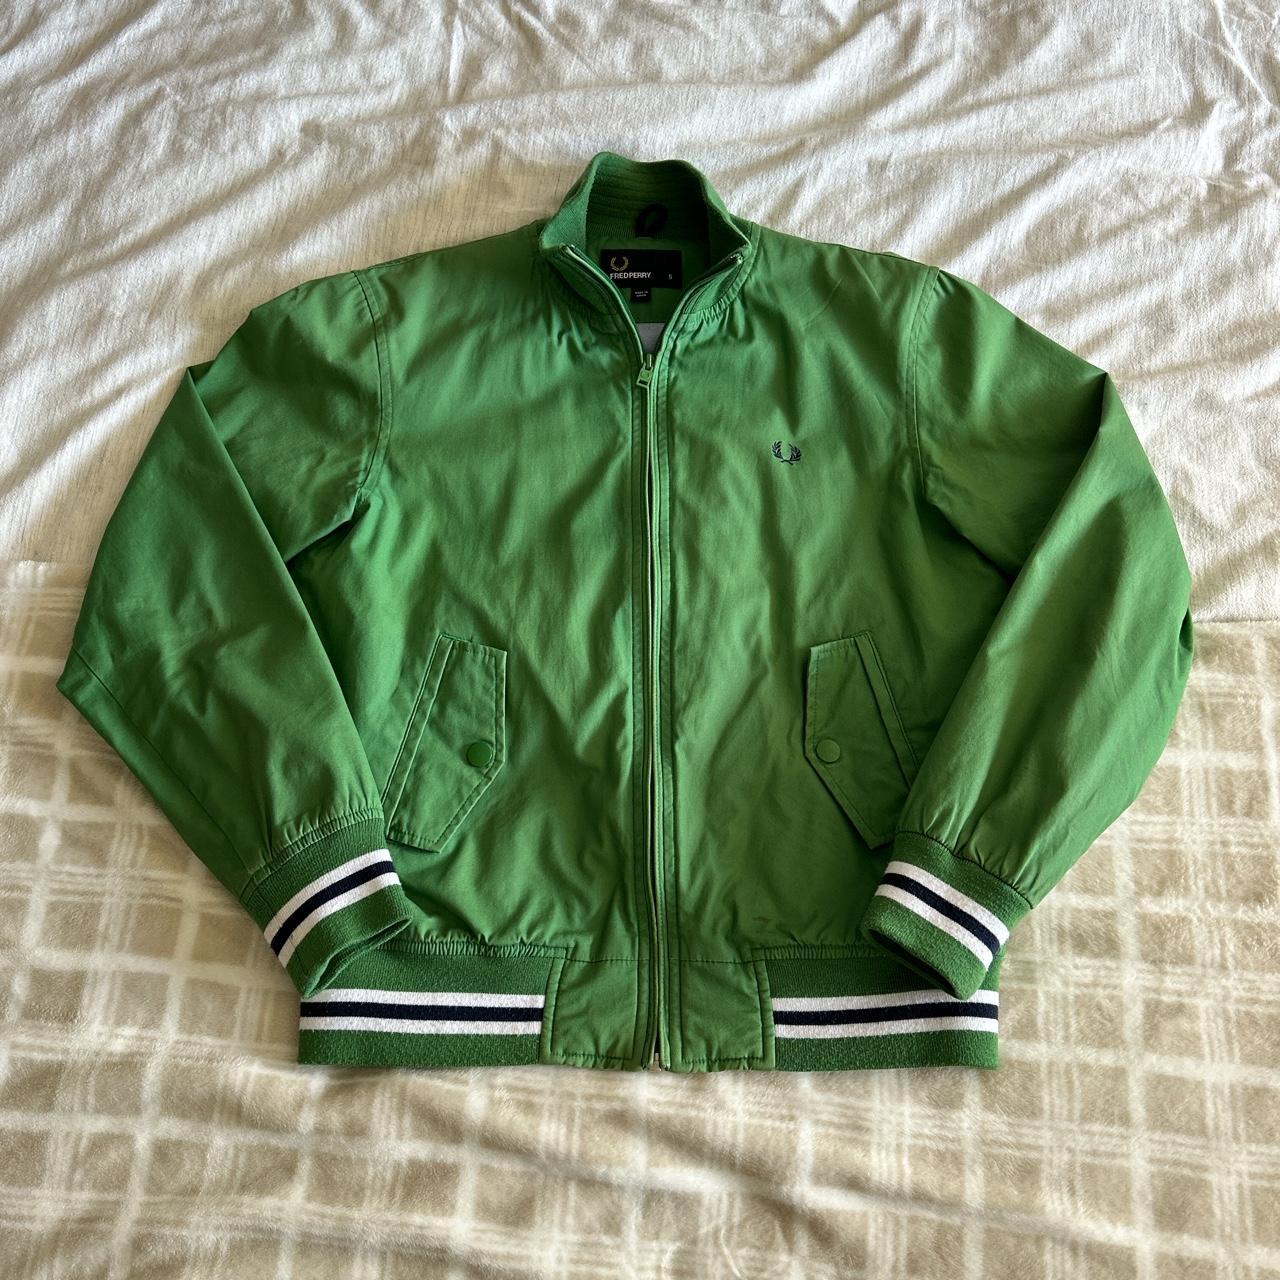 Green Fred Perry Jacket - slight blemishes shown in... - Depop